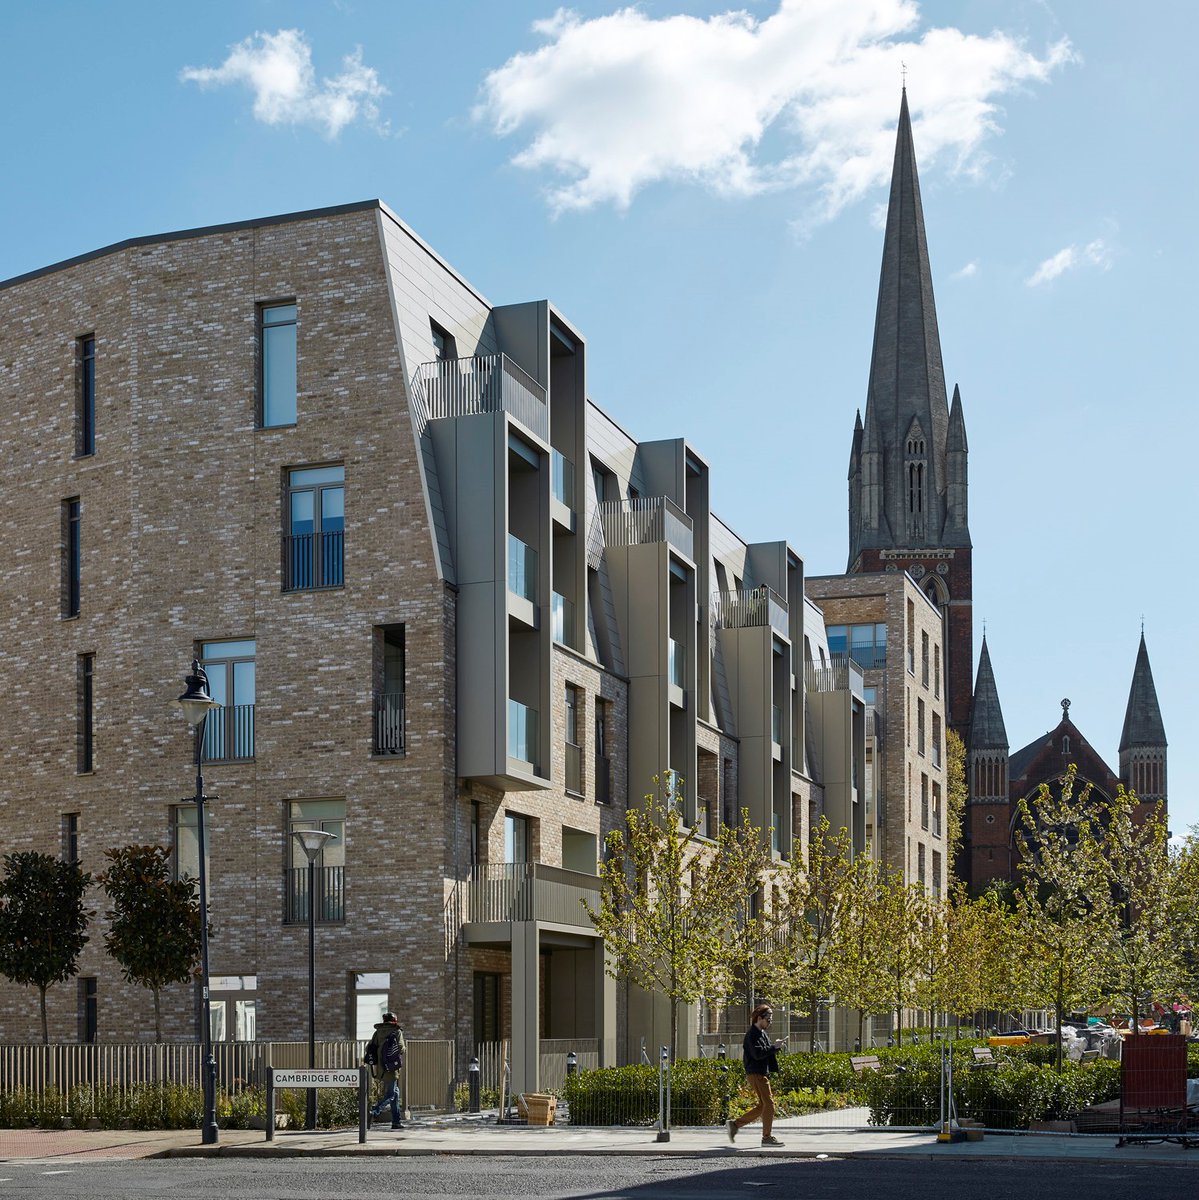 Unity Place, our 100% social housing project completed for Brent Council last year with @FCBStudios & @GortScott , has been shortlisted for an NLA award, a WAF award, an AJ award and a Housing Design award. Join the team tomorrow for a tour! -> programme.openhouse.org.uk/listings/10231